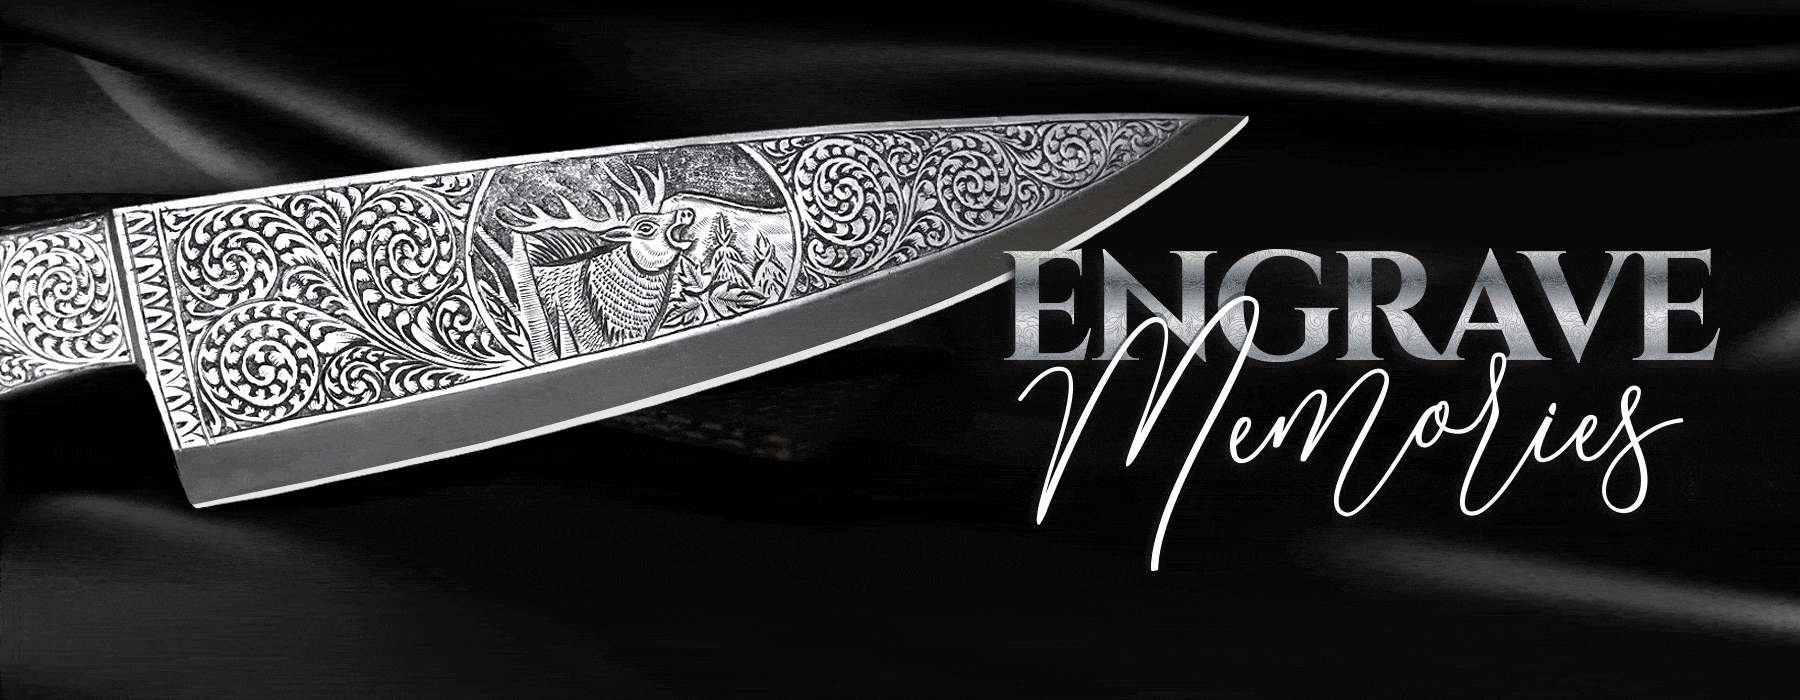 Hand Engraved Knives